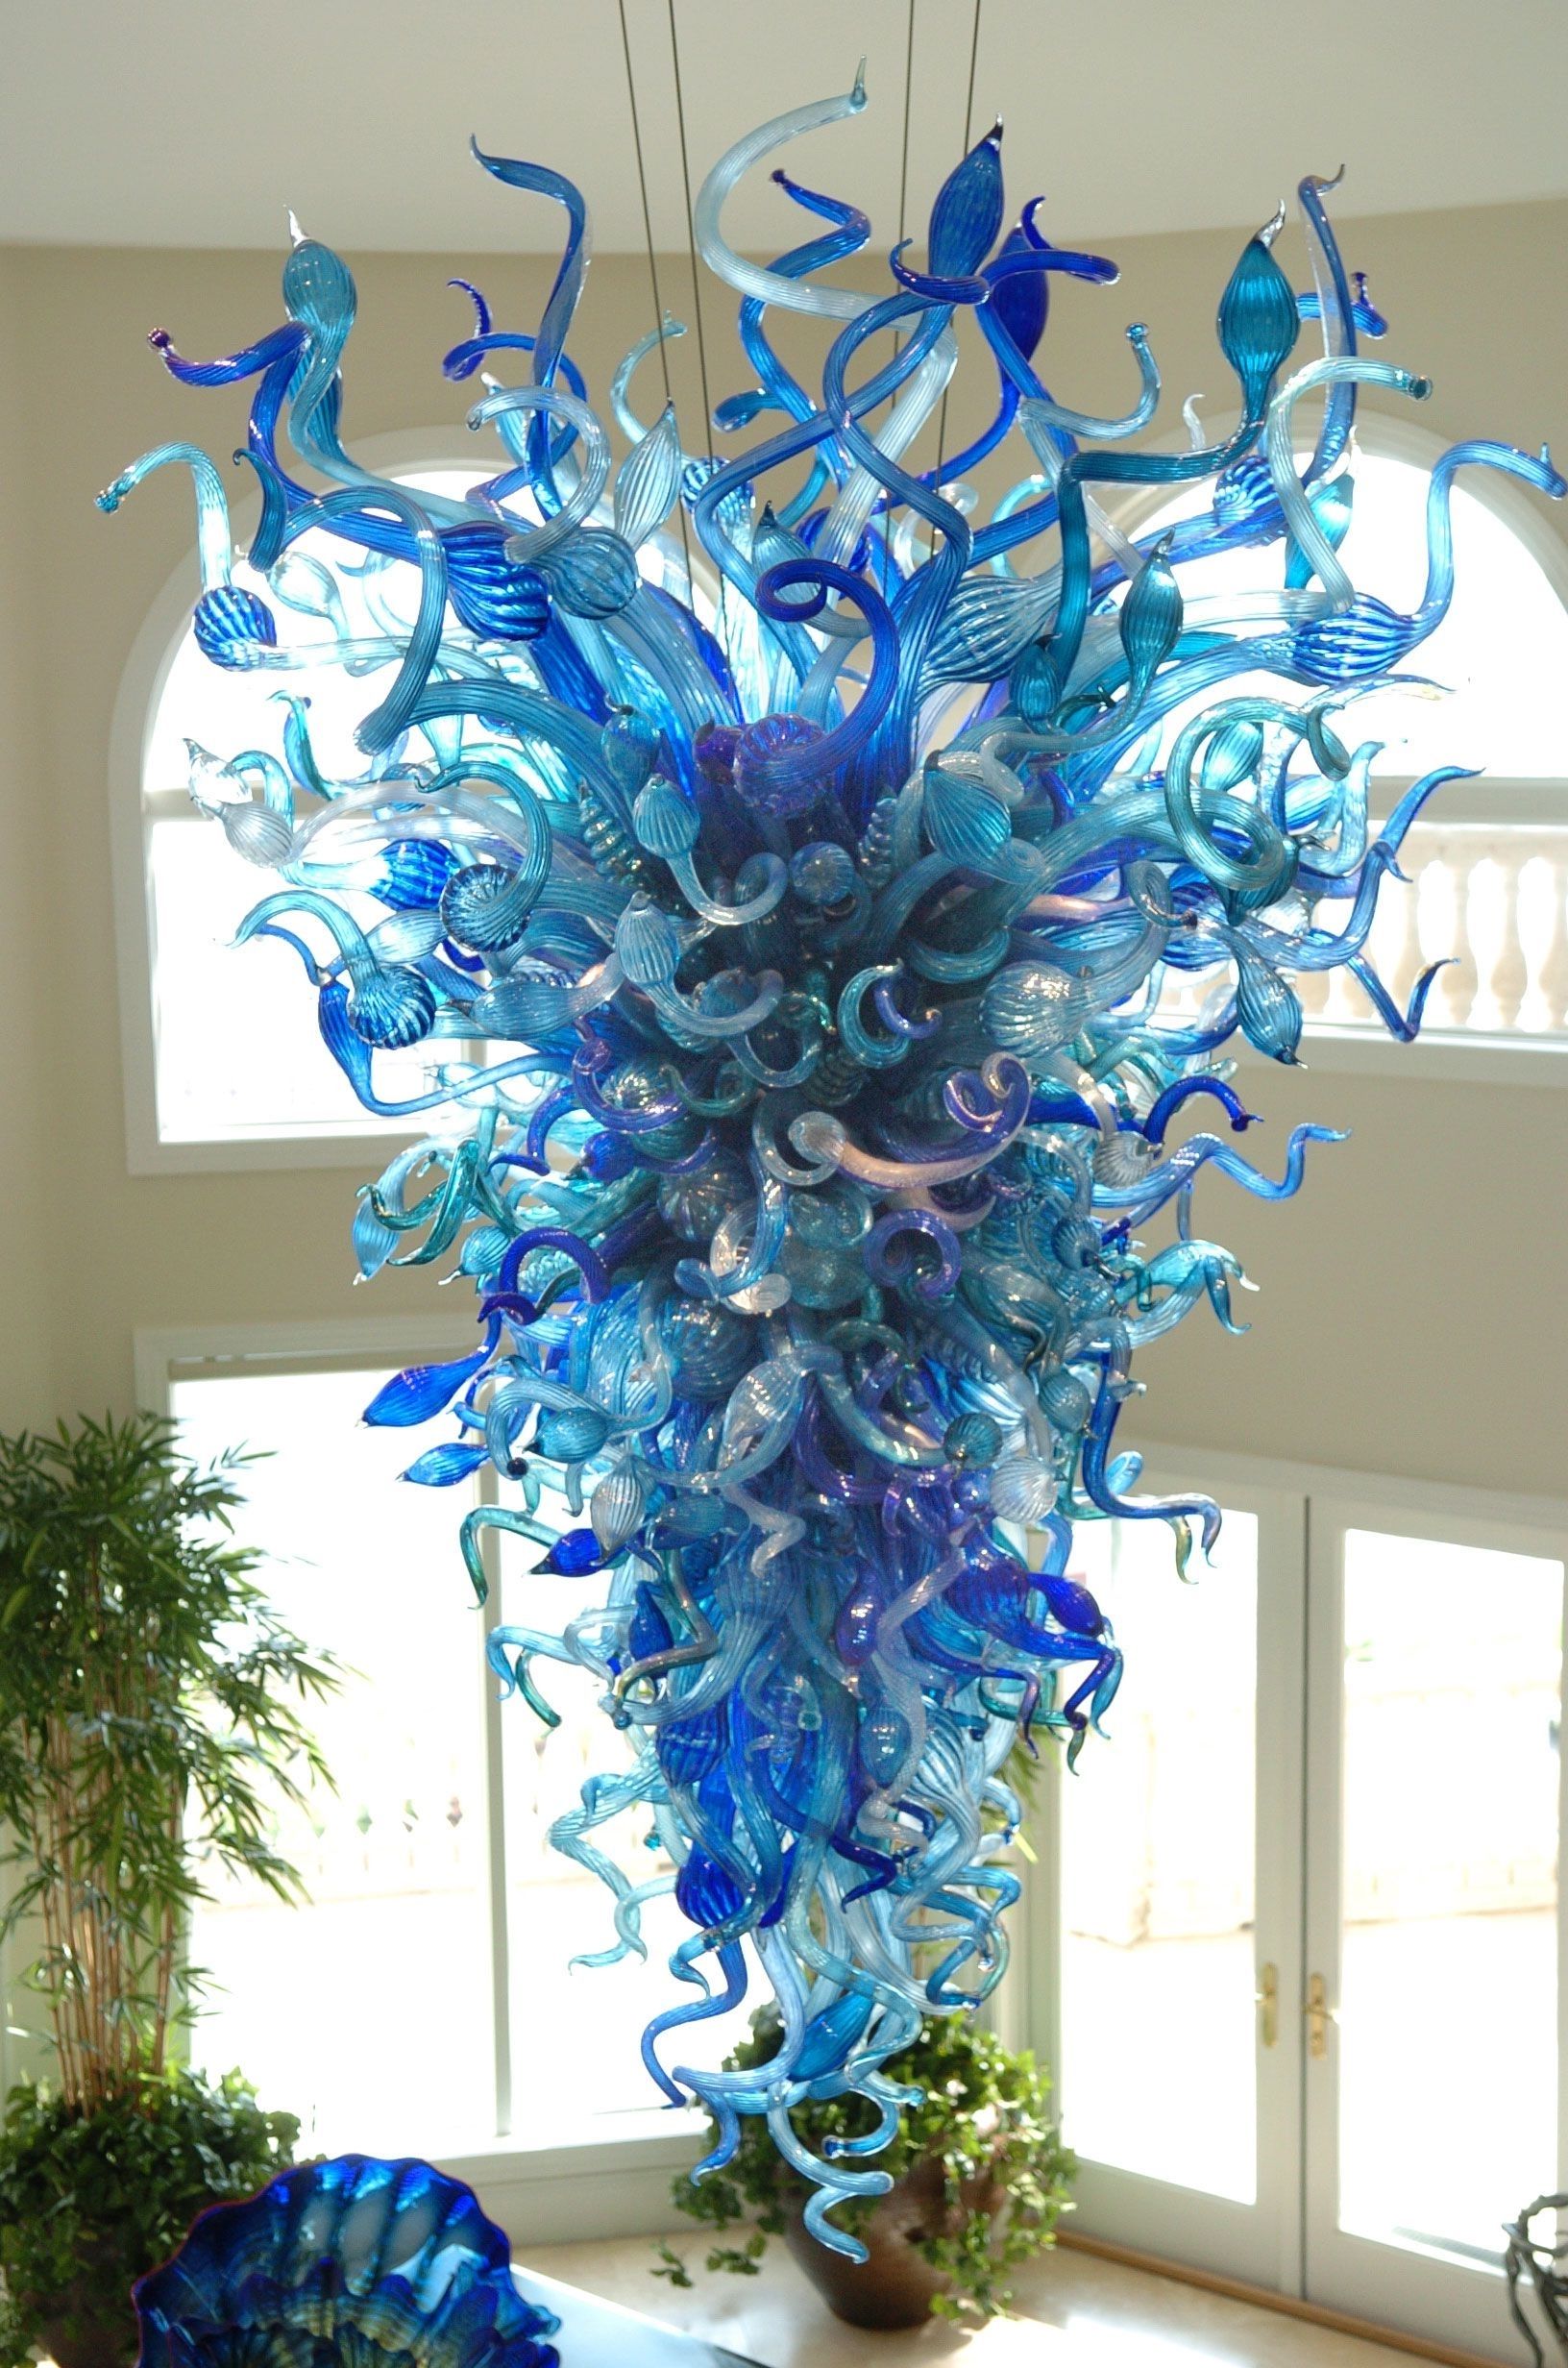 Famous Stonecipher Chandelier – To Be Housed In Collection Of Chihuly – St Intended For Turquoise Blown Glass Chandeliers (View 18 of 20)